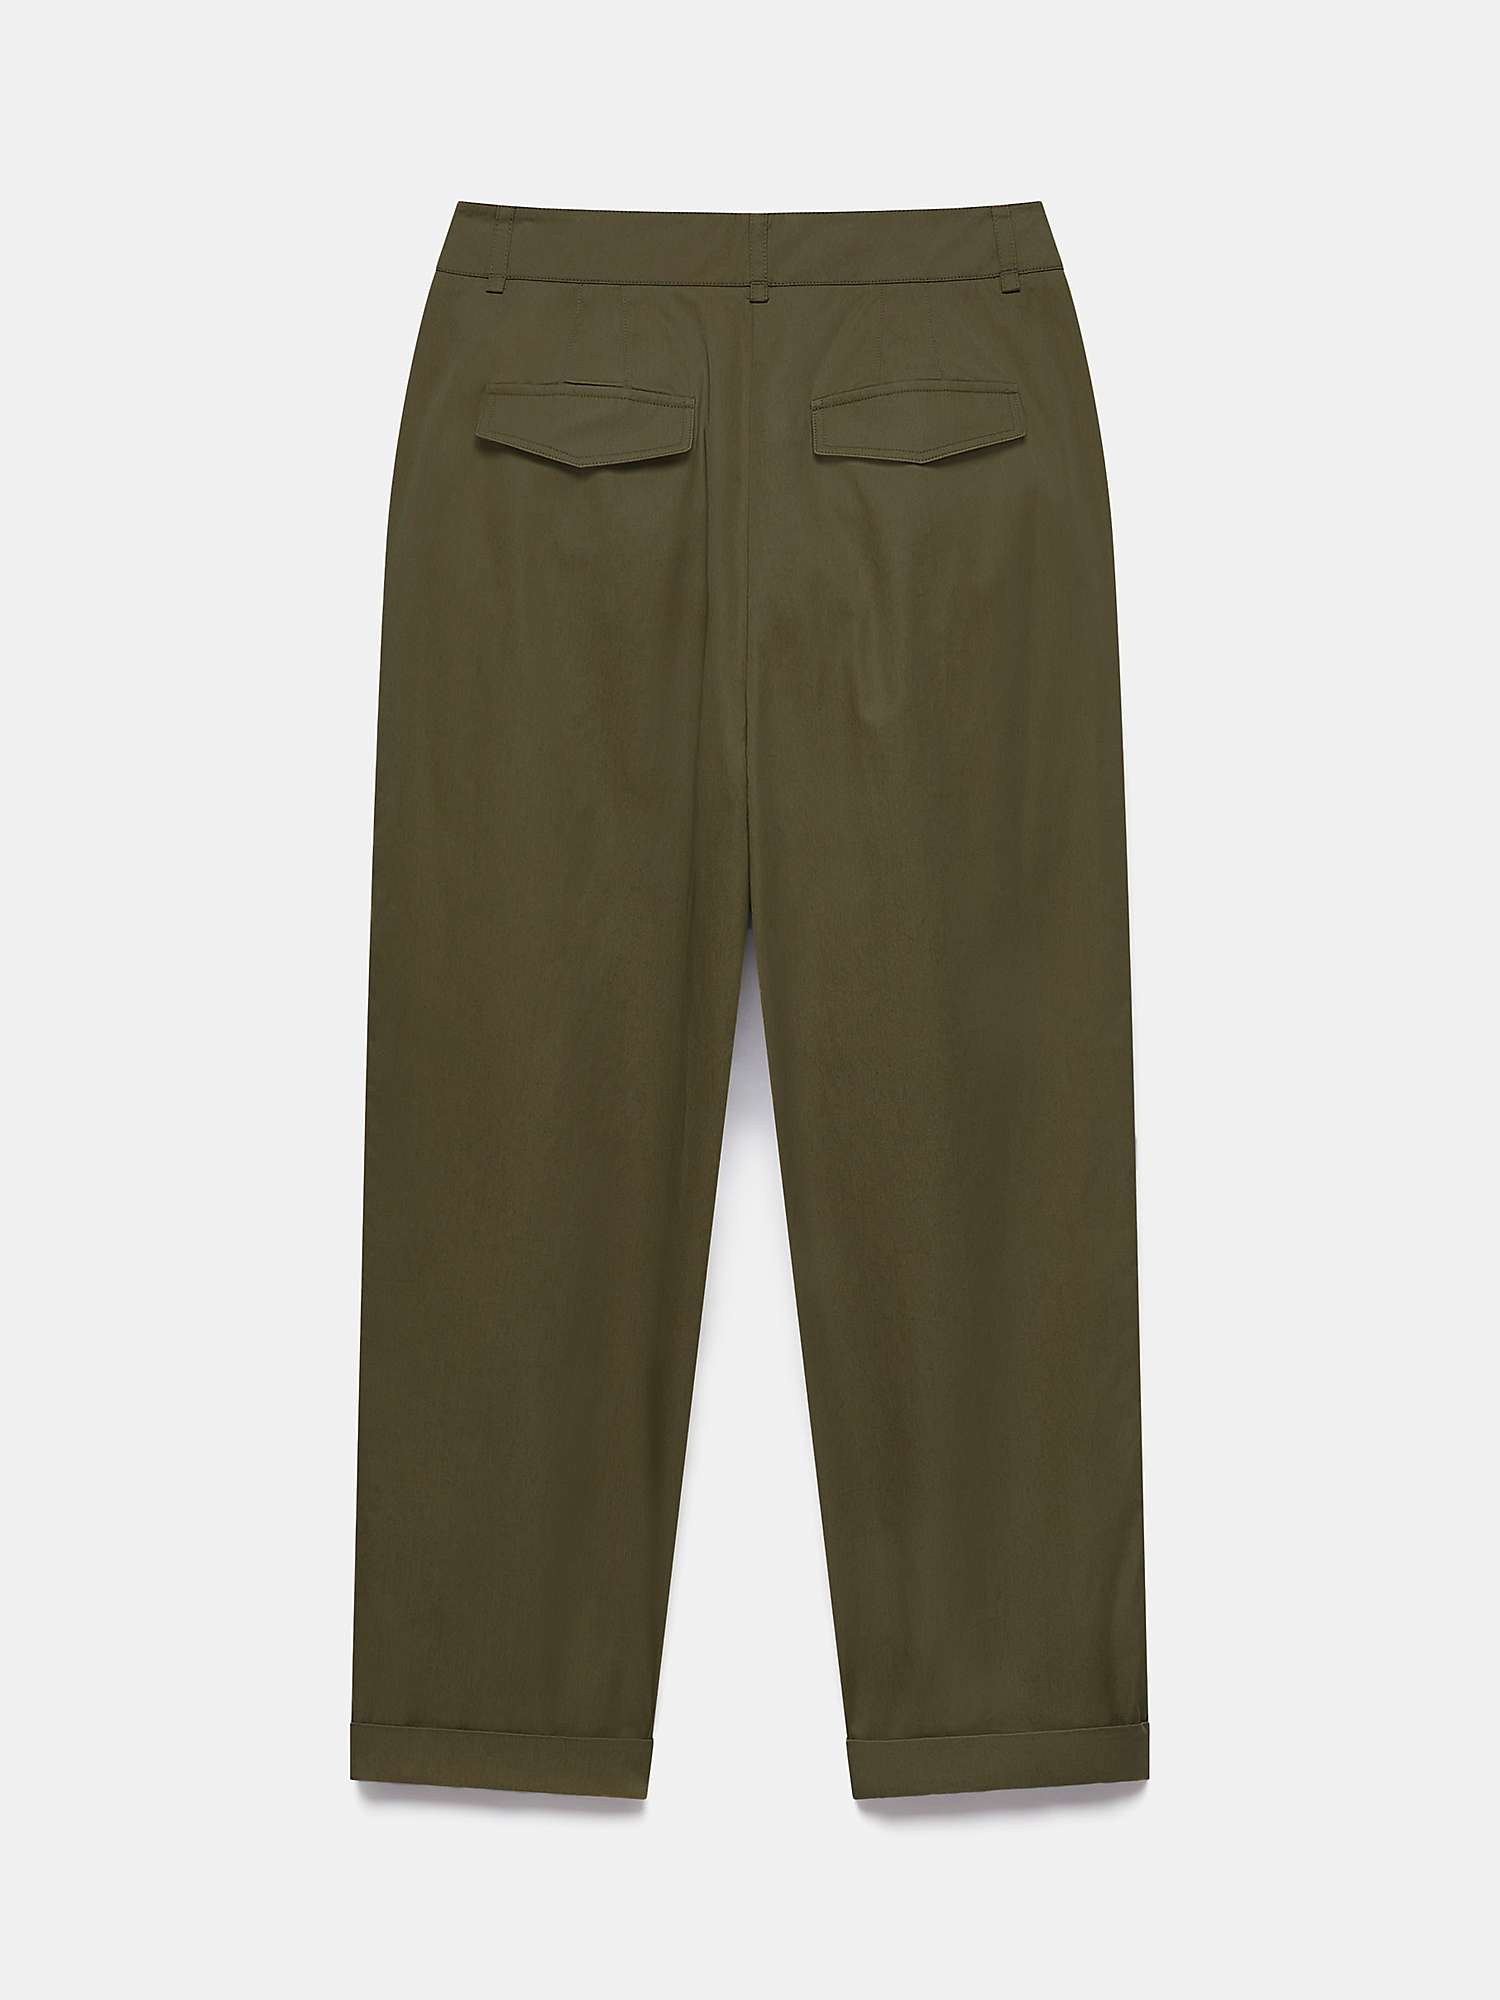 Buy Mint Velvet Pleat Front Tapered Cotton Trousers Online at johnlewis.com